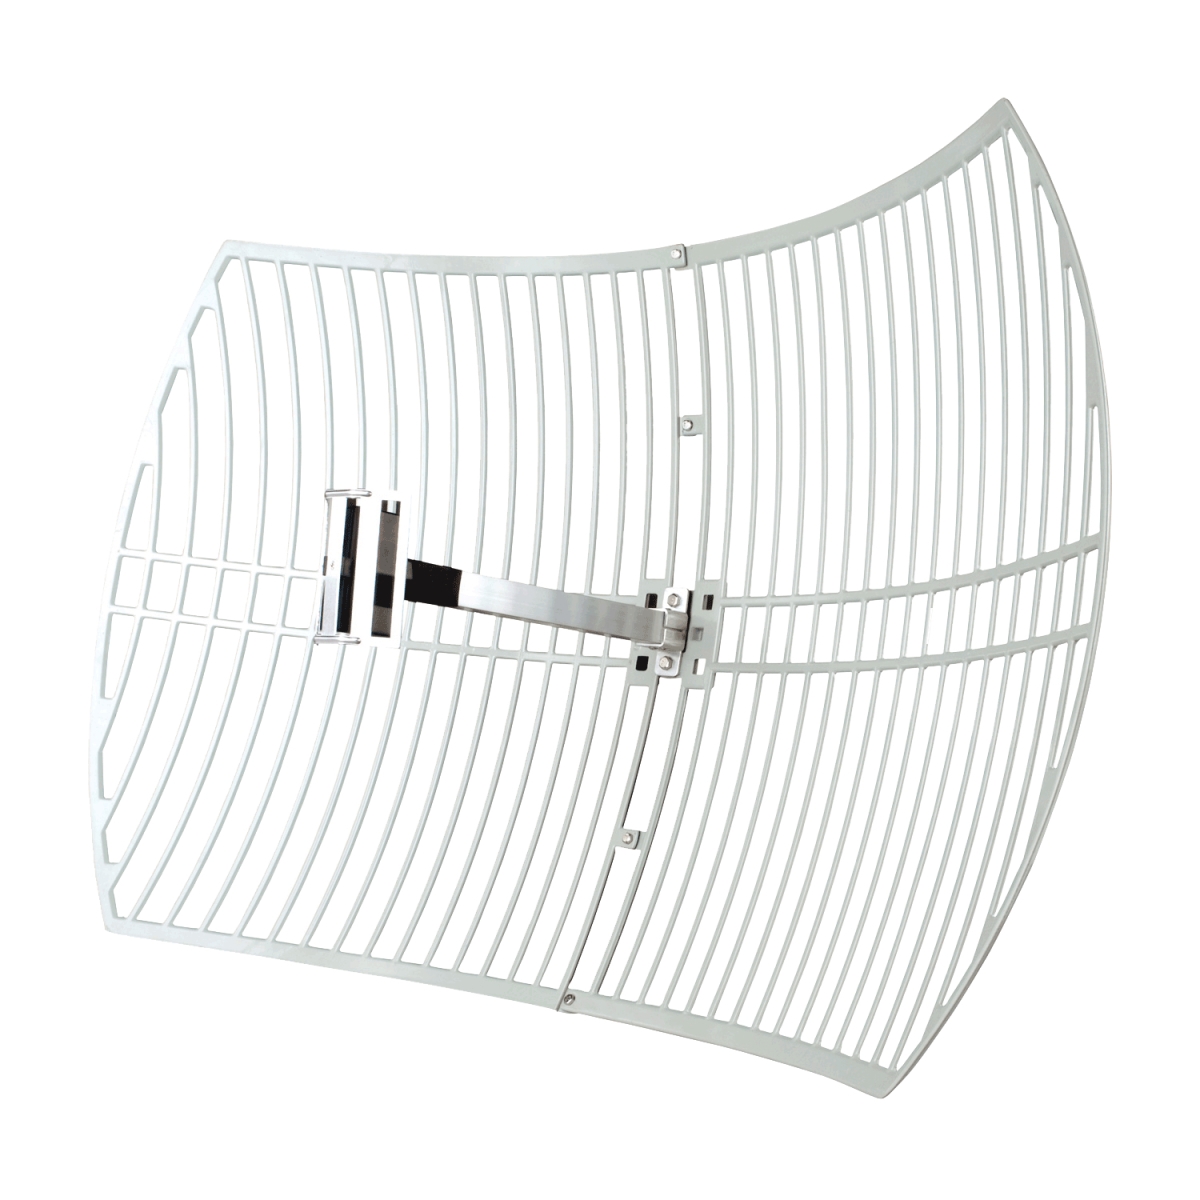 Picture of Turmode WAG24213 Grid Parabolic WiFi Antenna for 2.4GHz